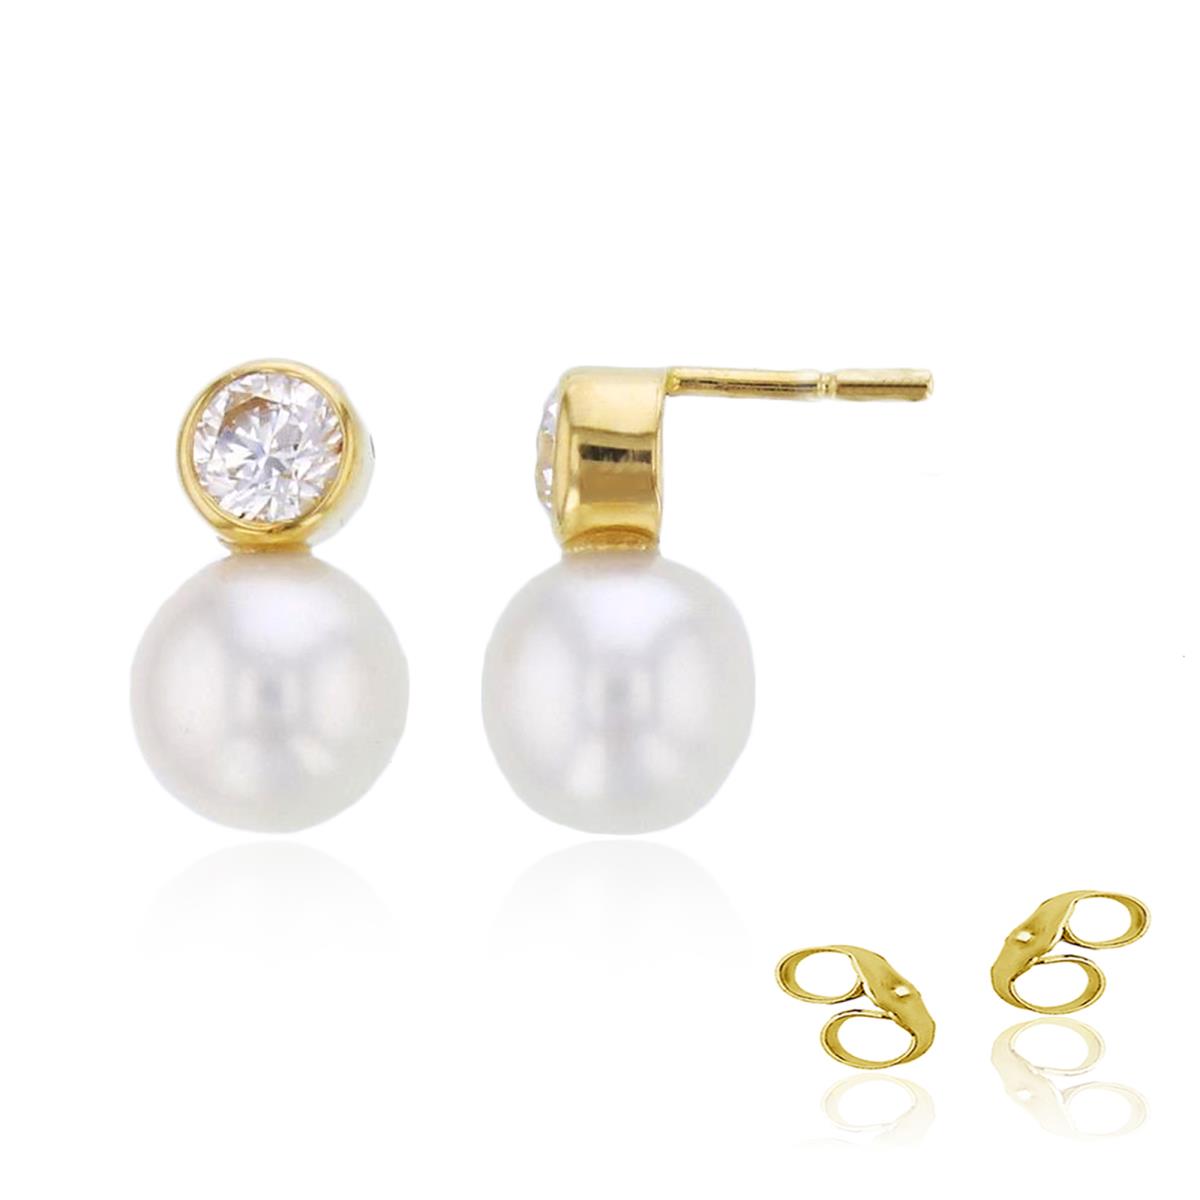 14K Yellow Gold Rnd Bezel Cr. White Sapphire & 5mm FWP Studs with 4.5mm Clutch